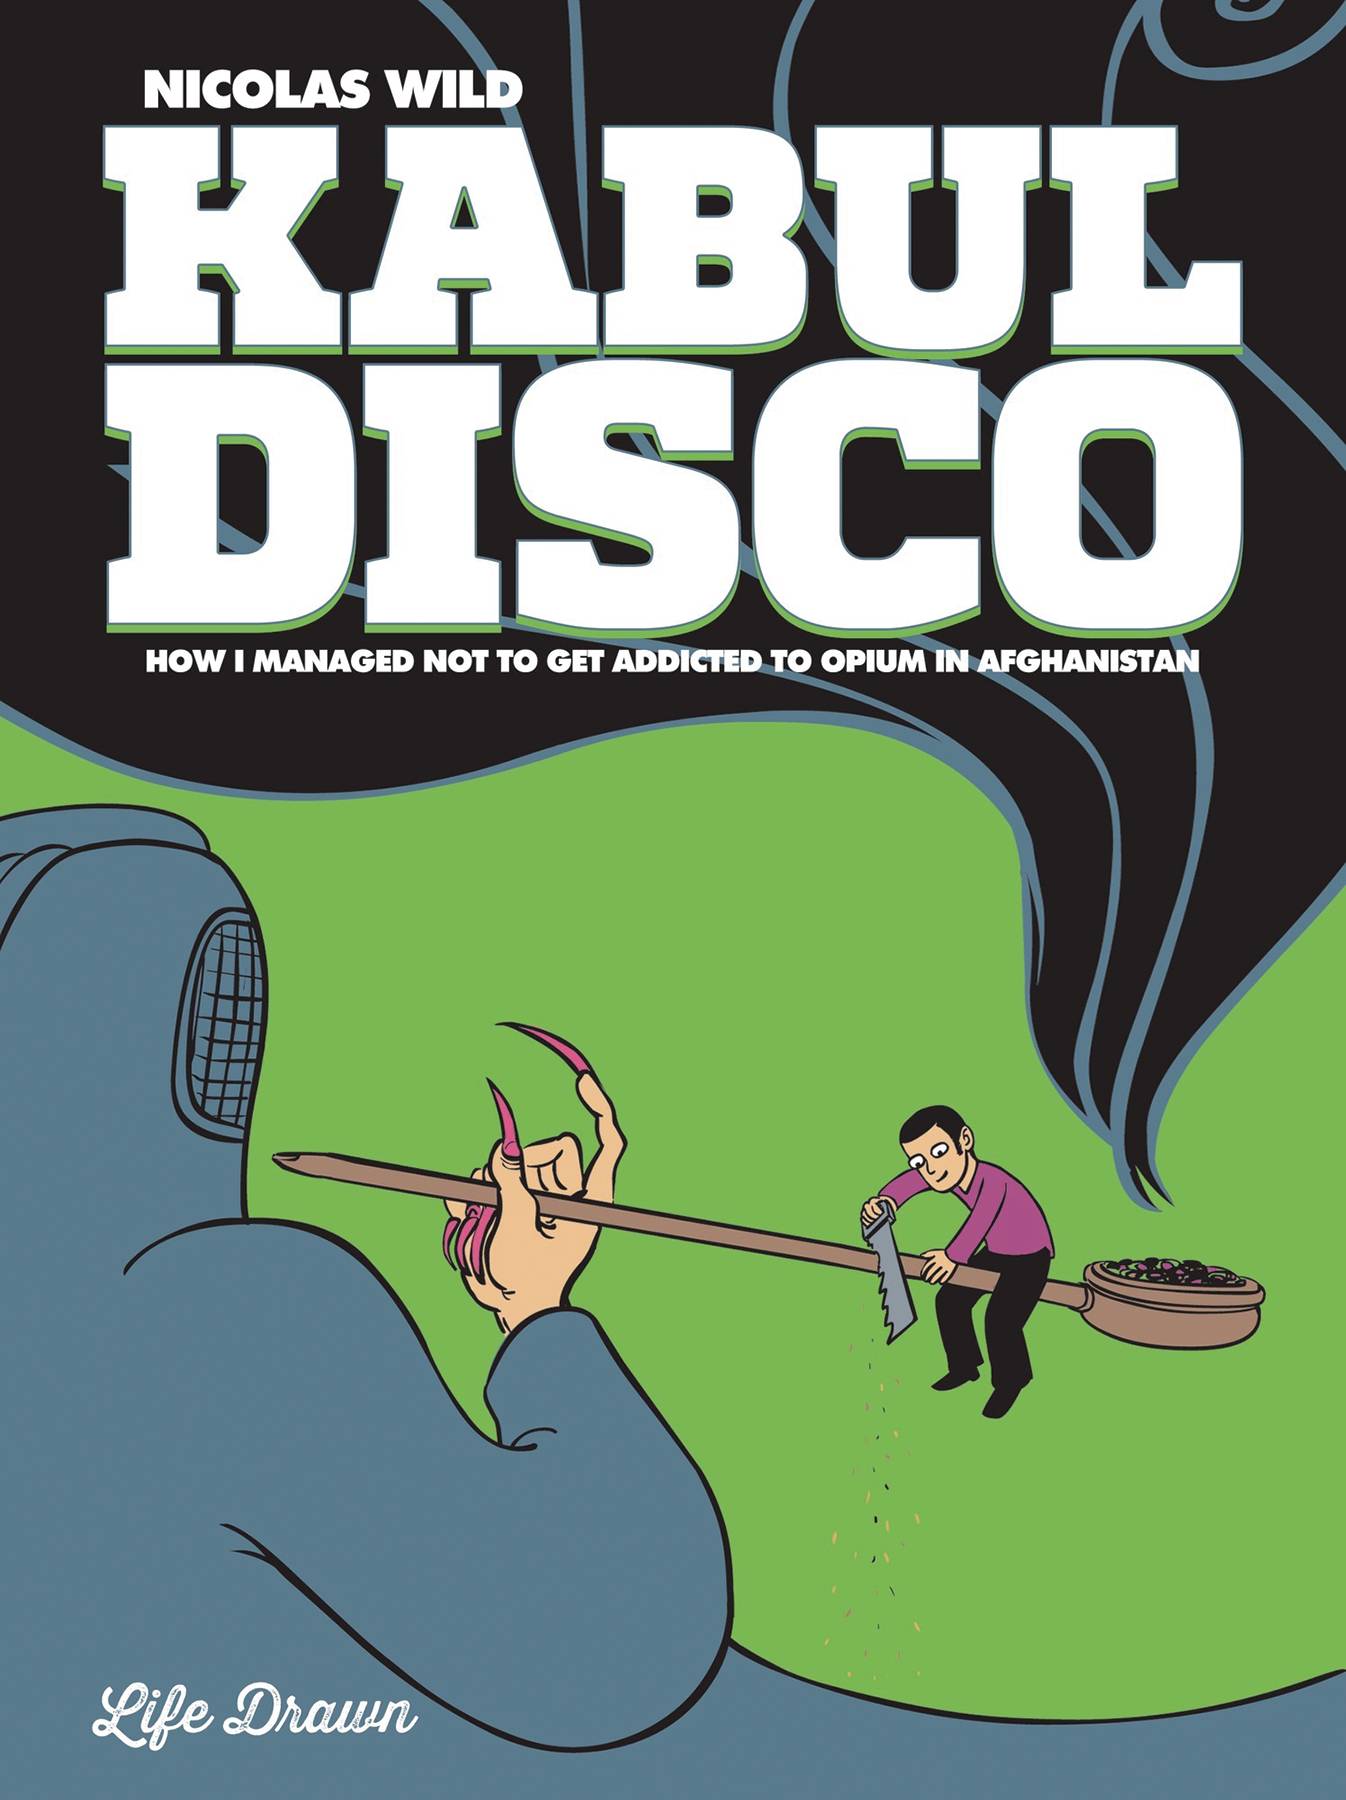 KABUL DISCO GN BOOK 02 (OF 2) MANAGED NOT ADDICTED OPIUM